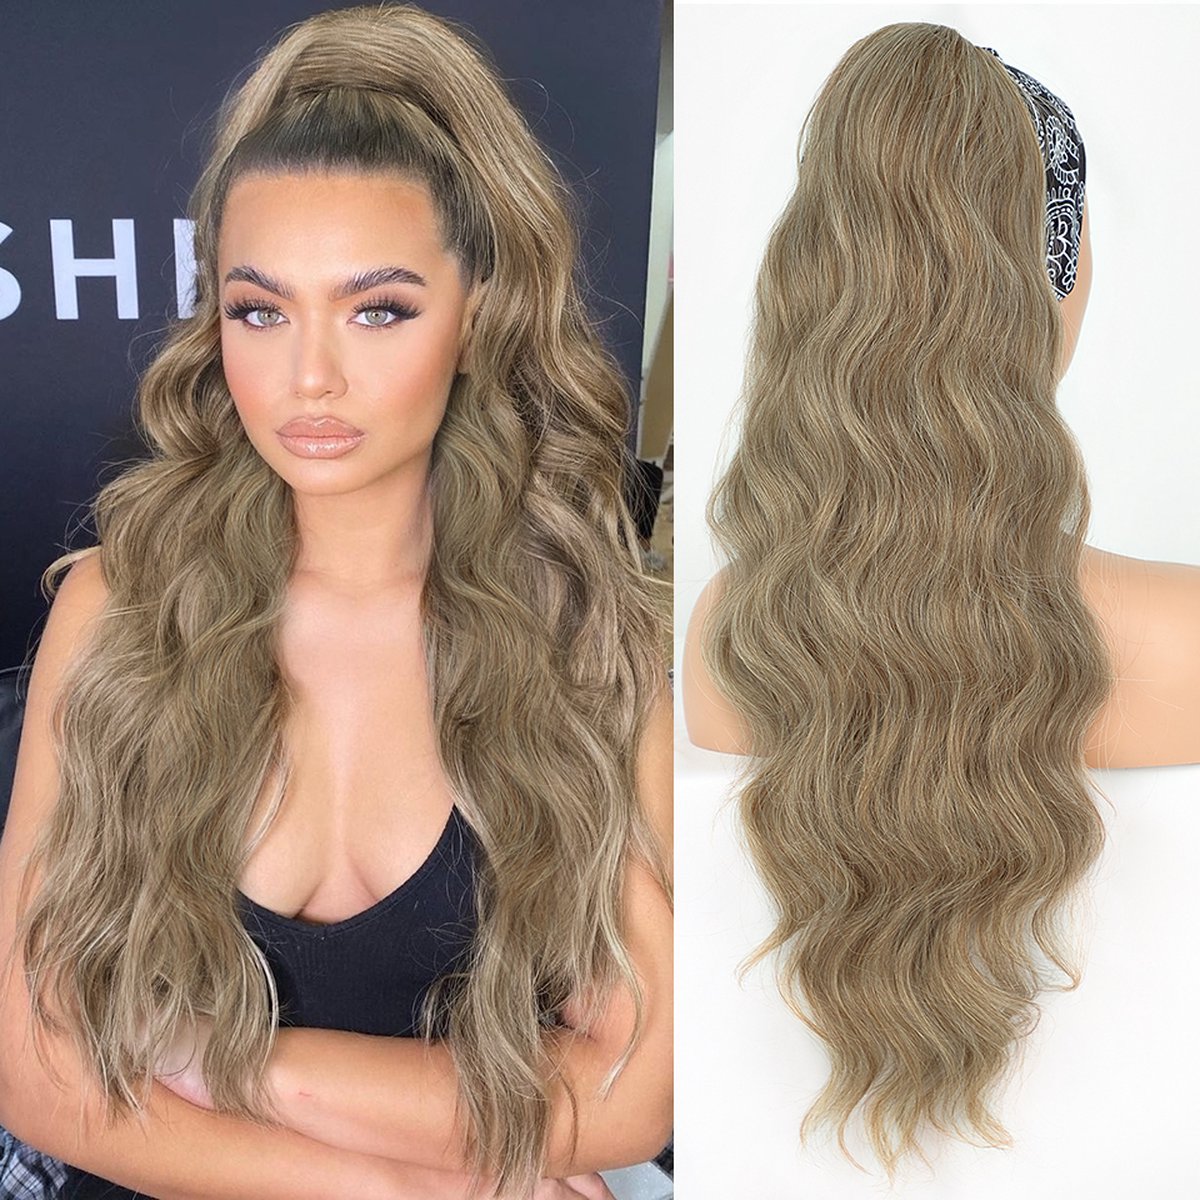 Miss Ponytails - Bodywave ponytail extentions - 24 inch - Blond 12-613 - Hair extentions - Haarverlenging